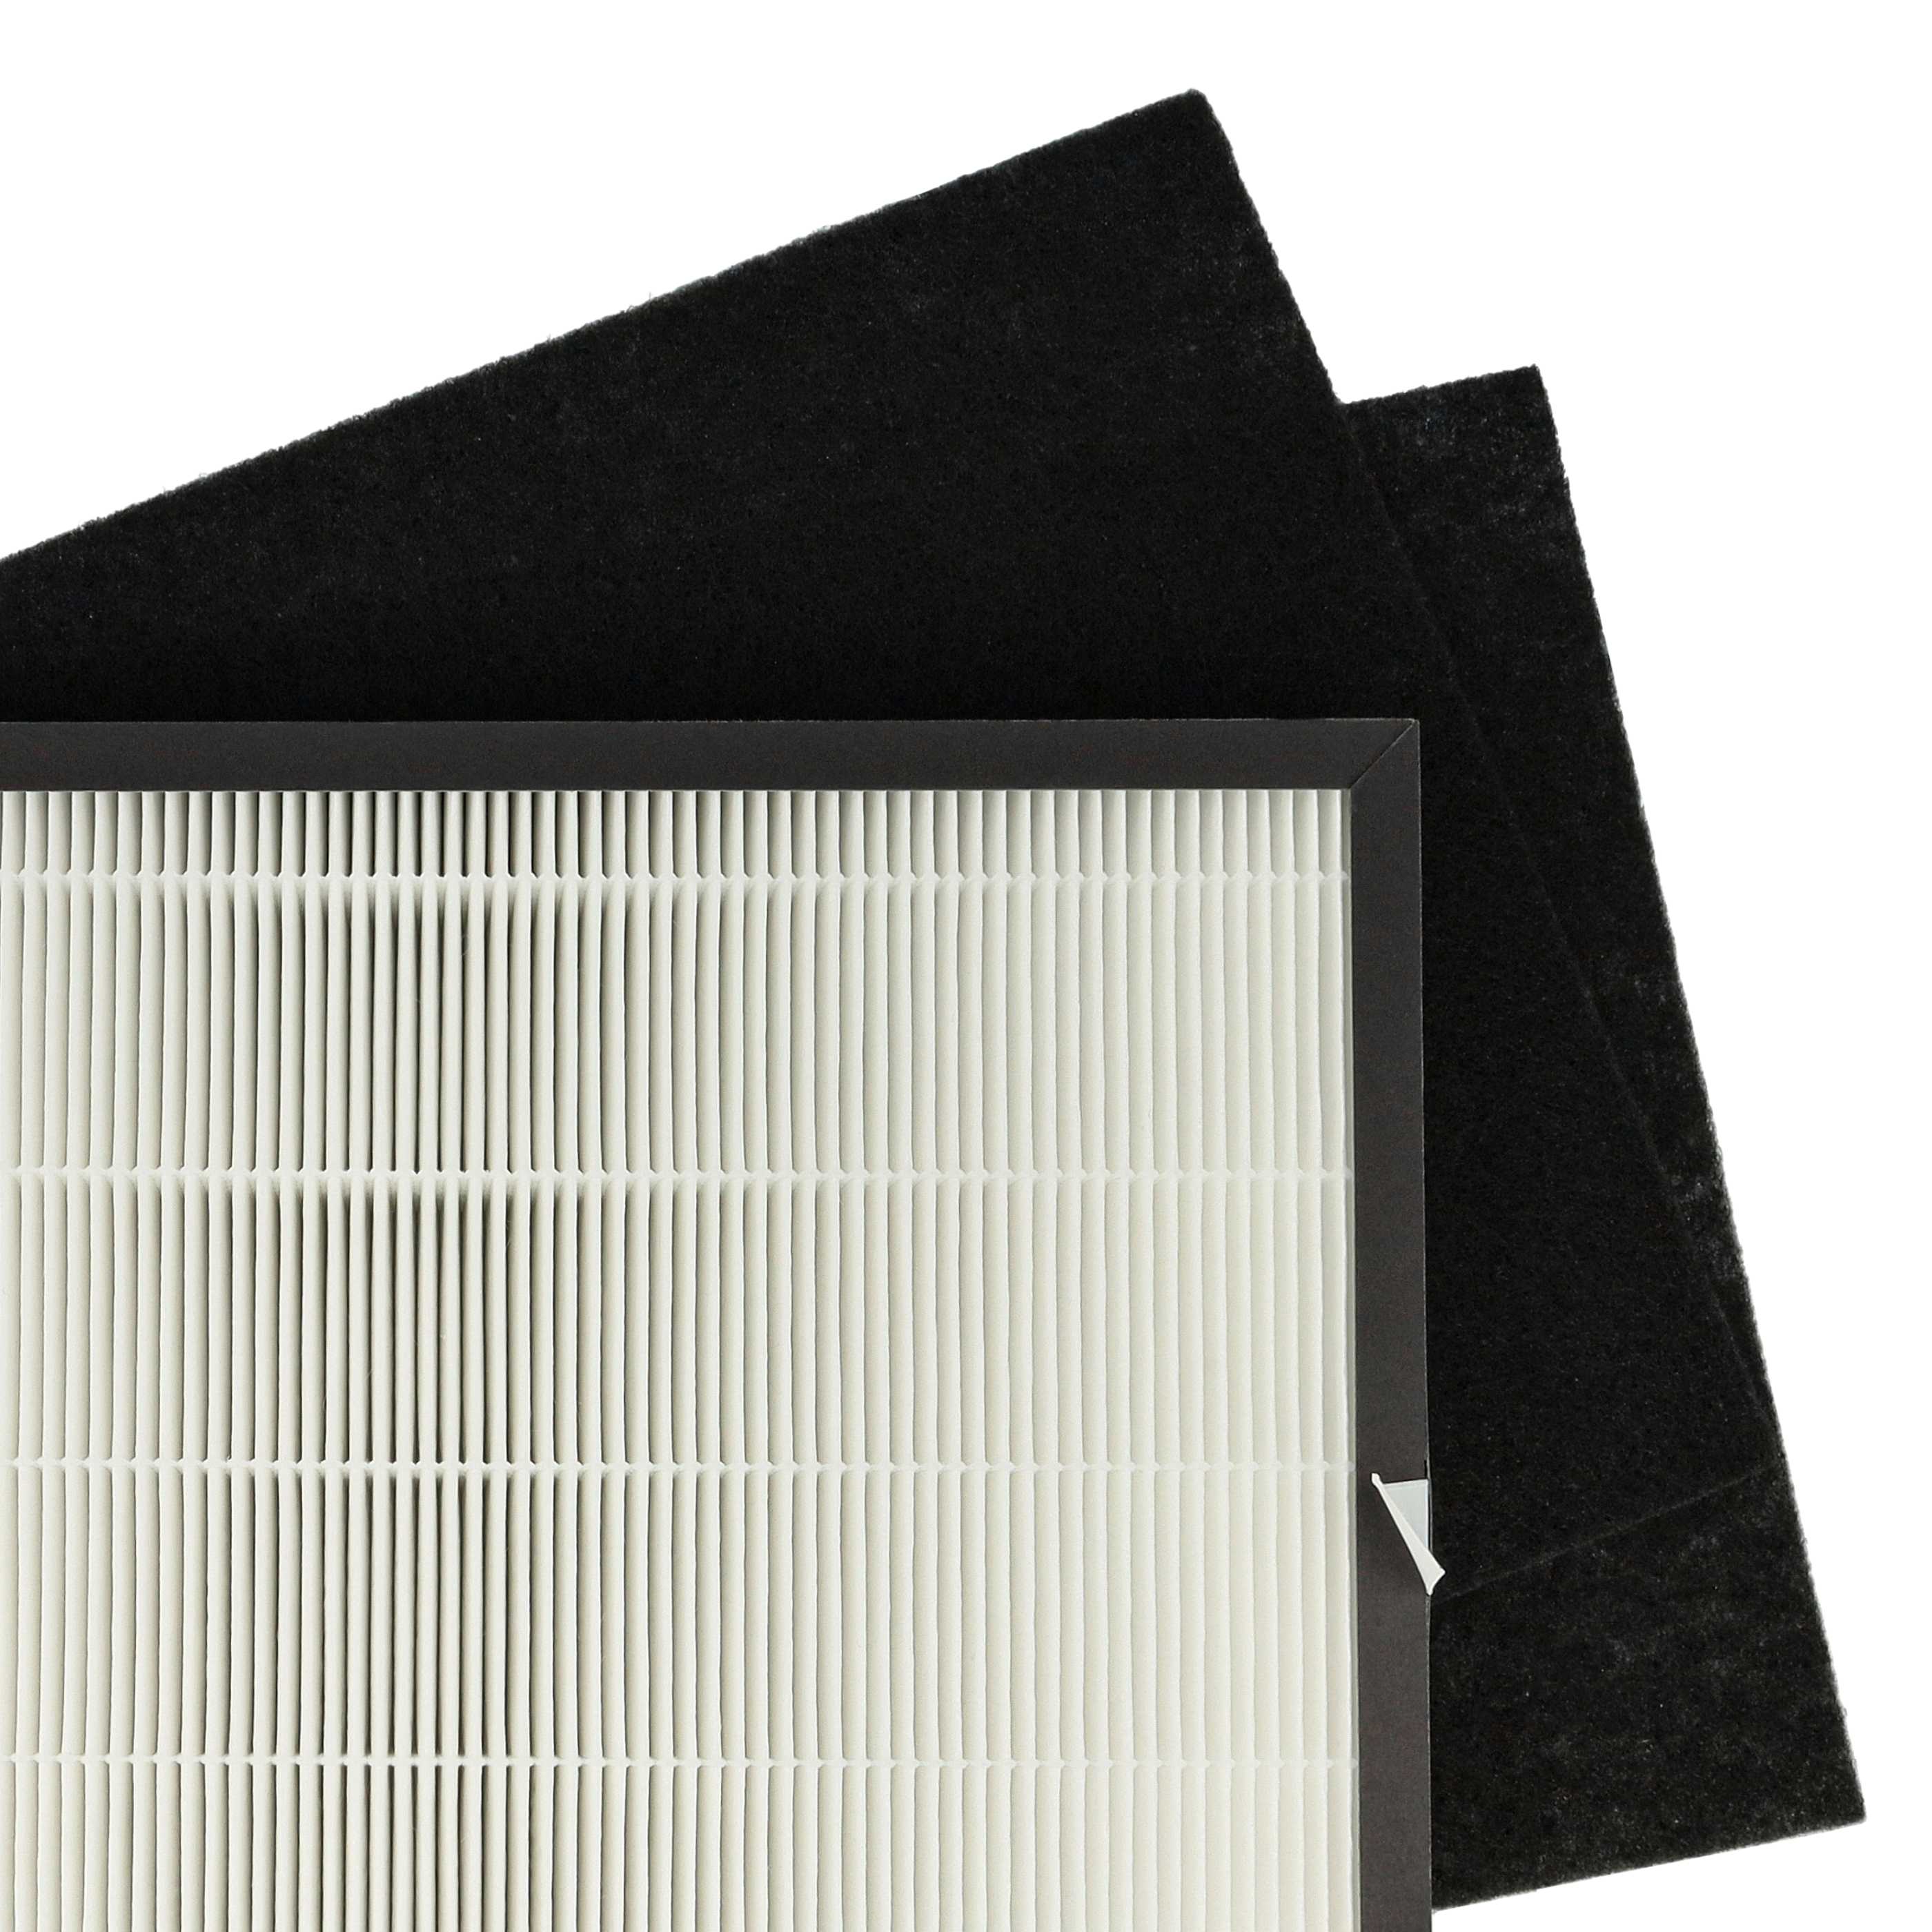 3 Part Filter Set replaces Rowenta XD6040F0, H10 for Air Purifier - HEPA filter, activated carbon filter